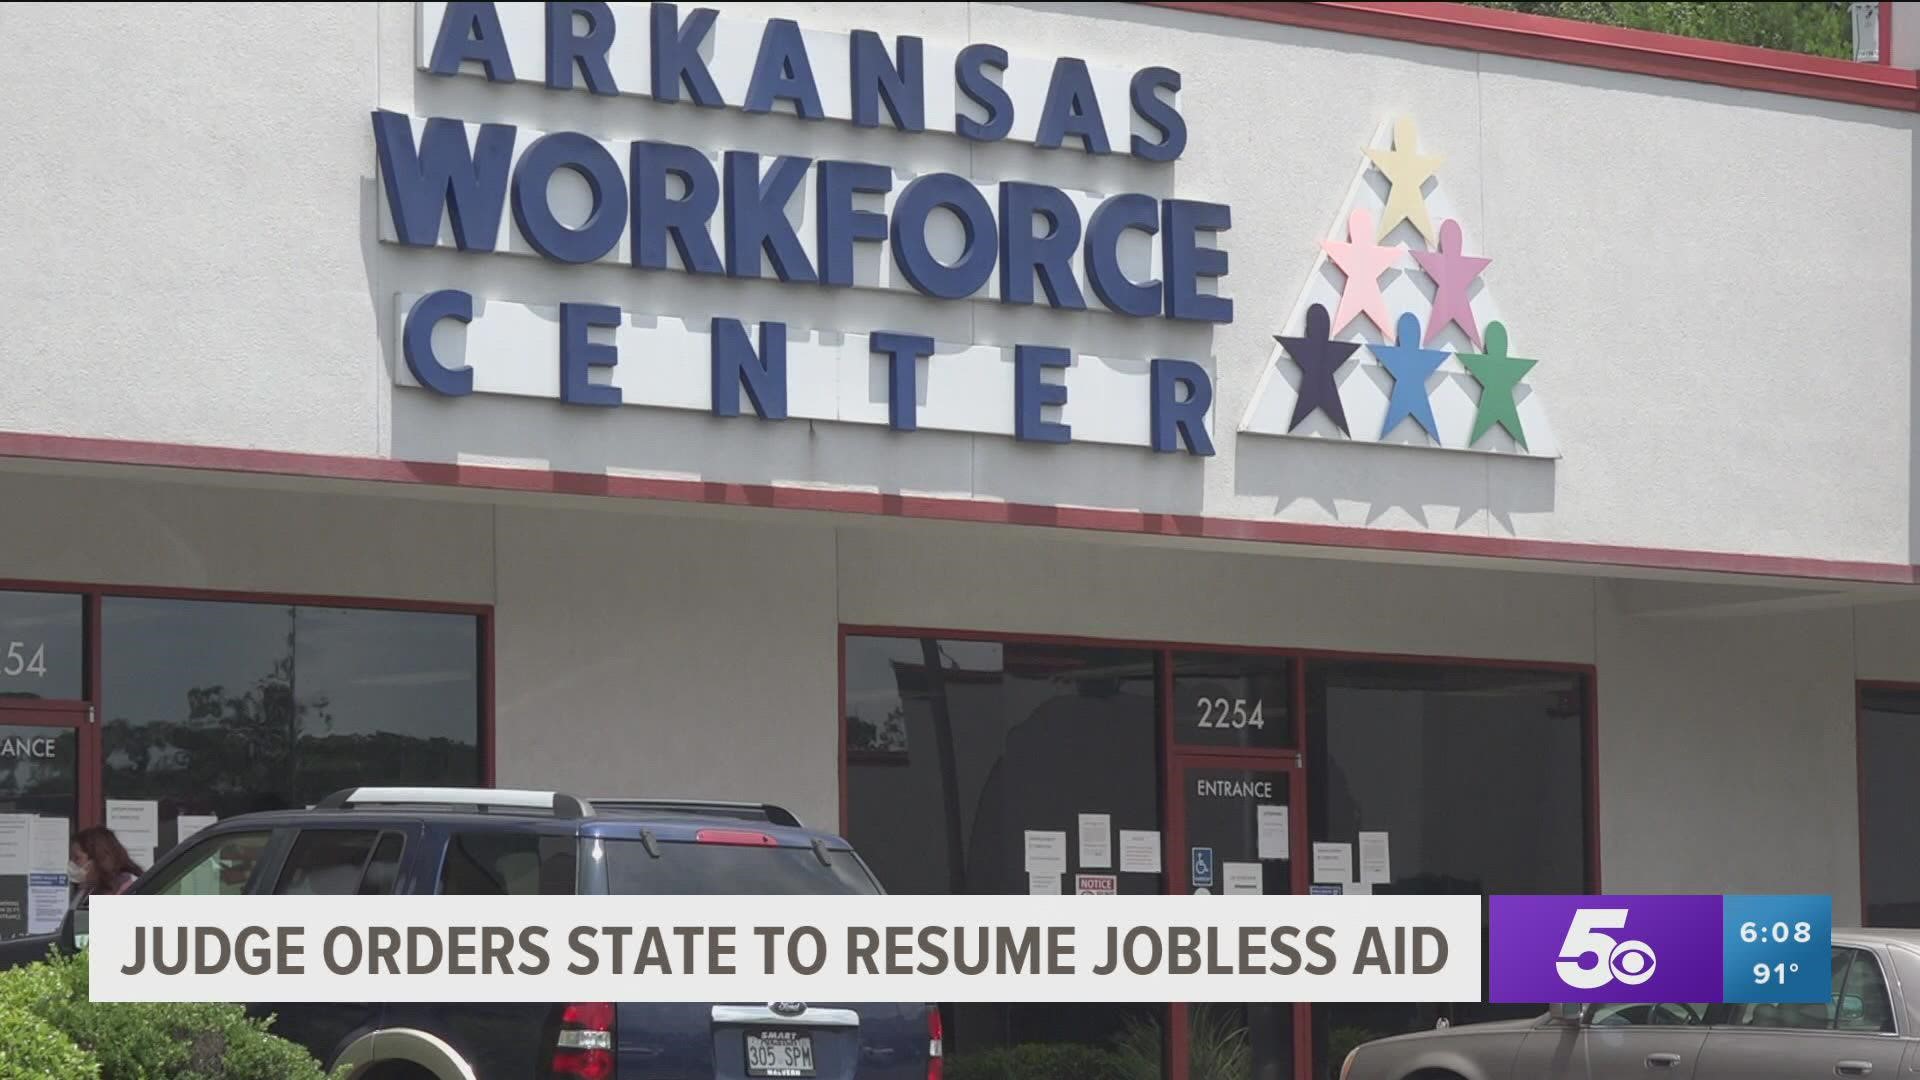 A Pulaski County judge has ruled that Arkansas violated the law by ending the extra pandemic unemployment relief early.